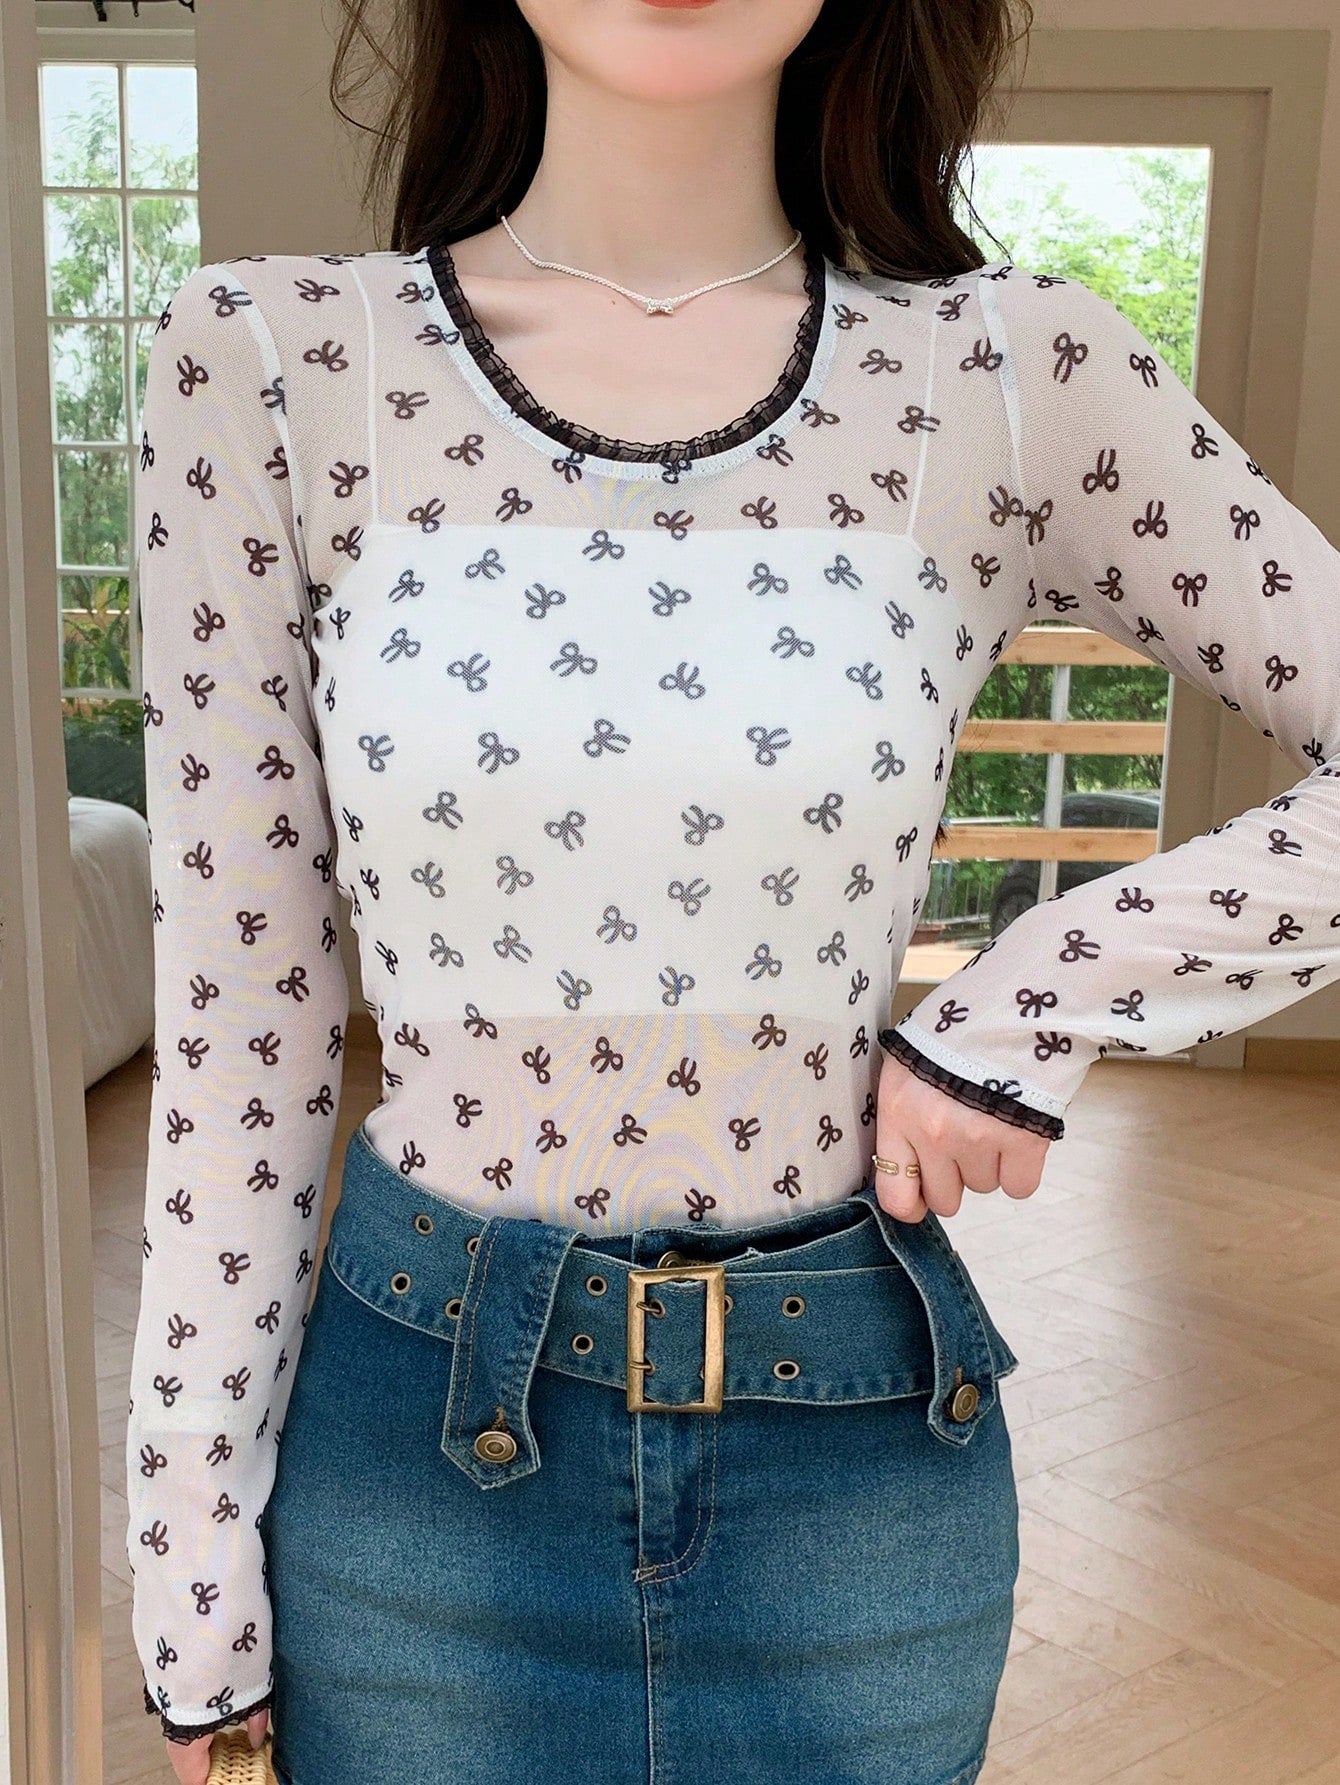 Floral Print Bodysuit Round Neck Long Sleeve Slim Fit Top For Women